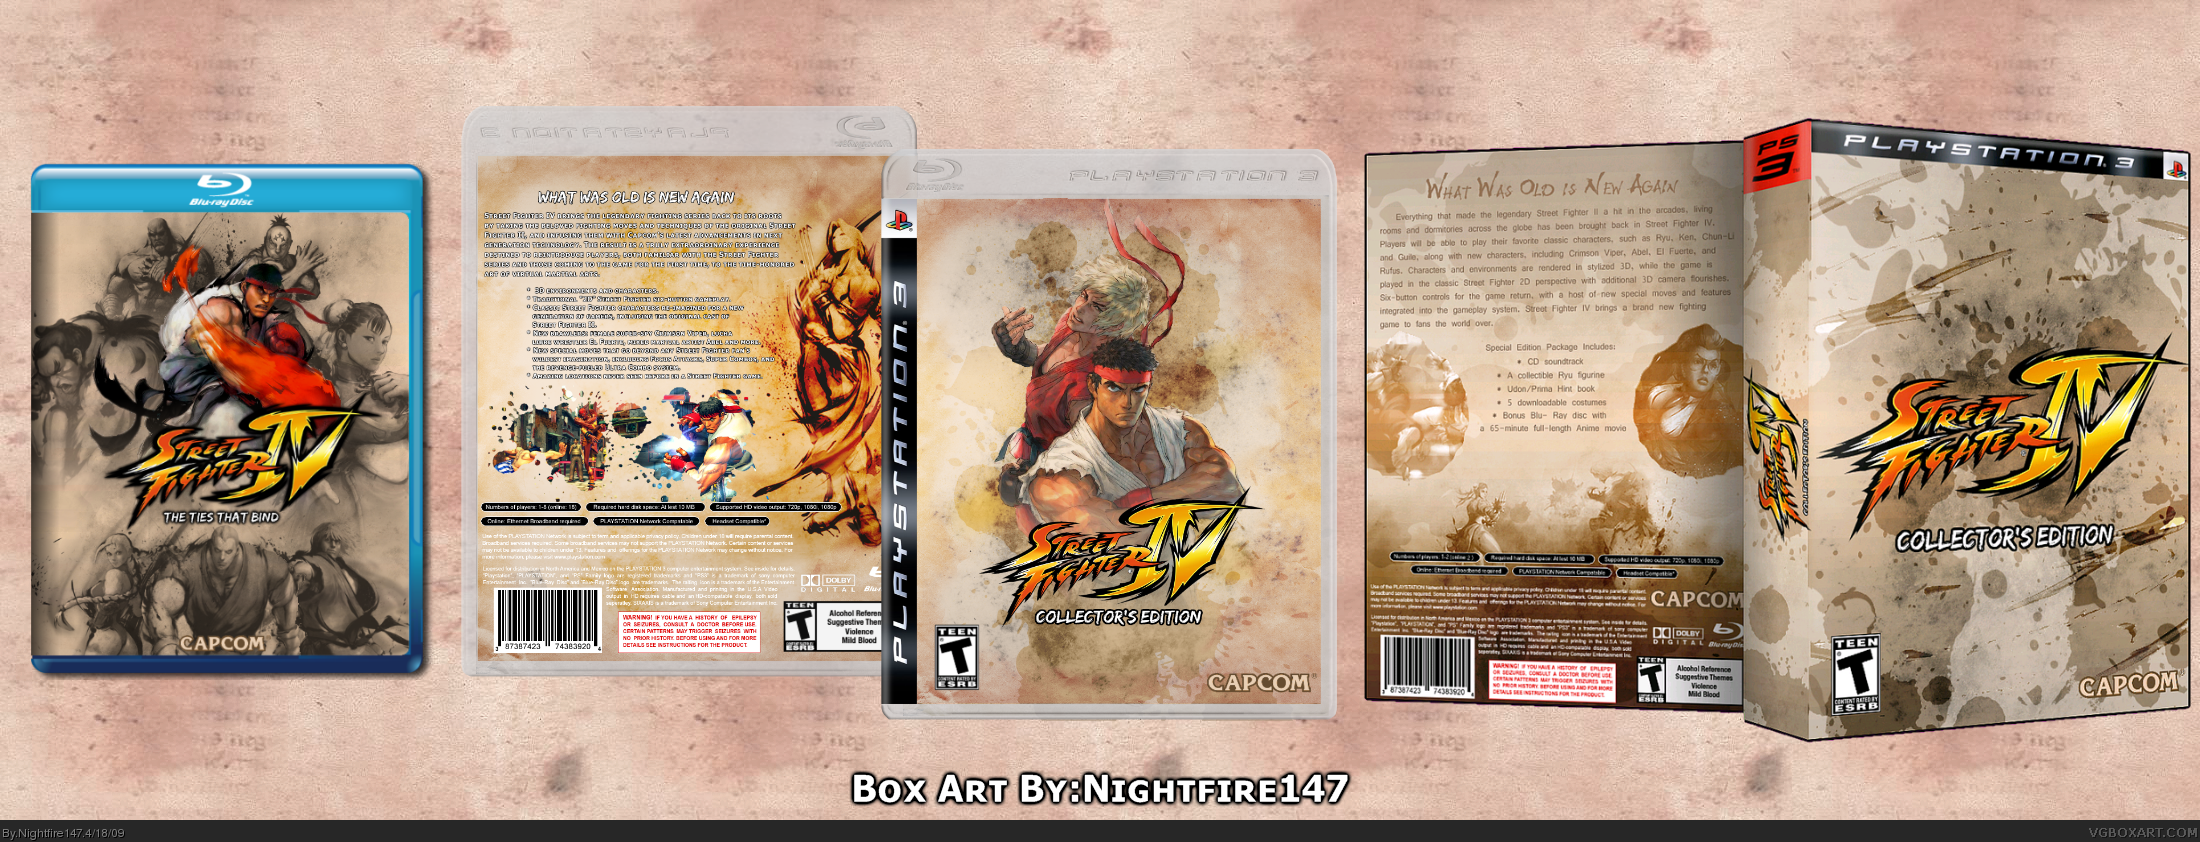 Street Fighter IV Collectors Edition box cover